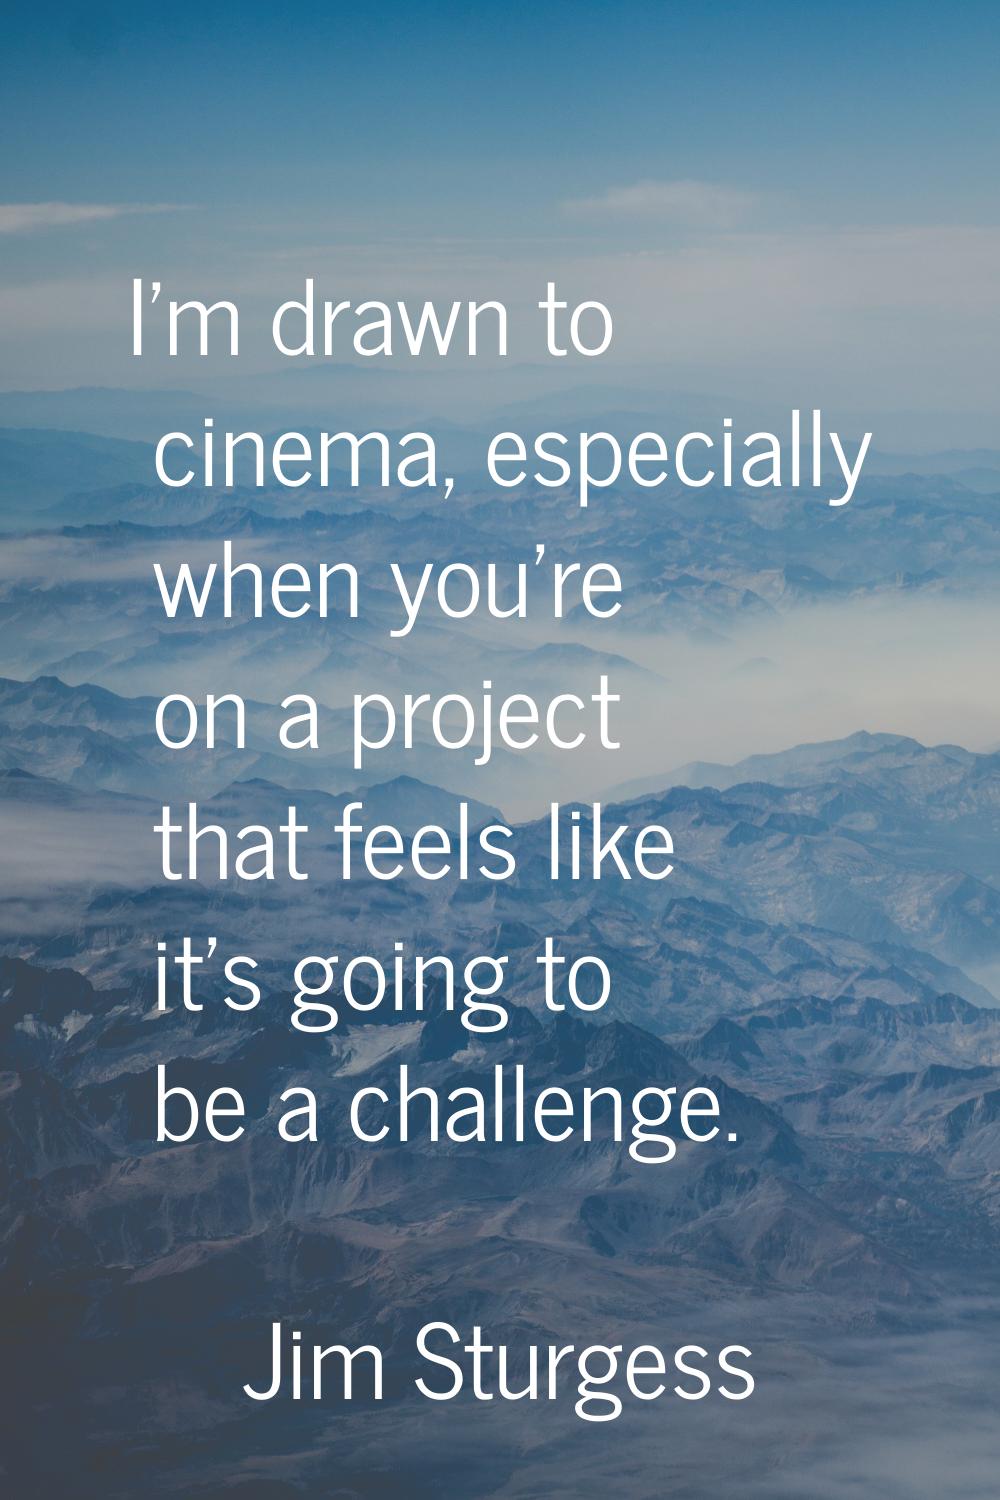 I'm drawn to cinema, especially when you're on a project that feels like it's going to be a challen